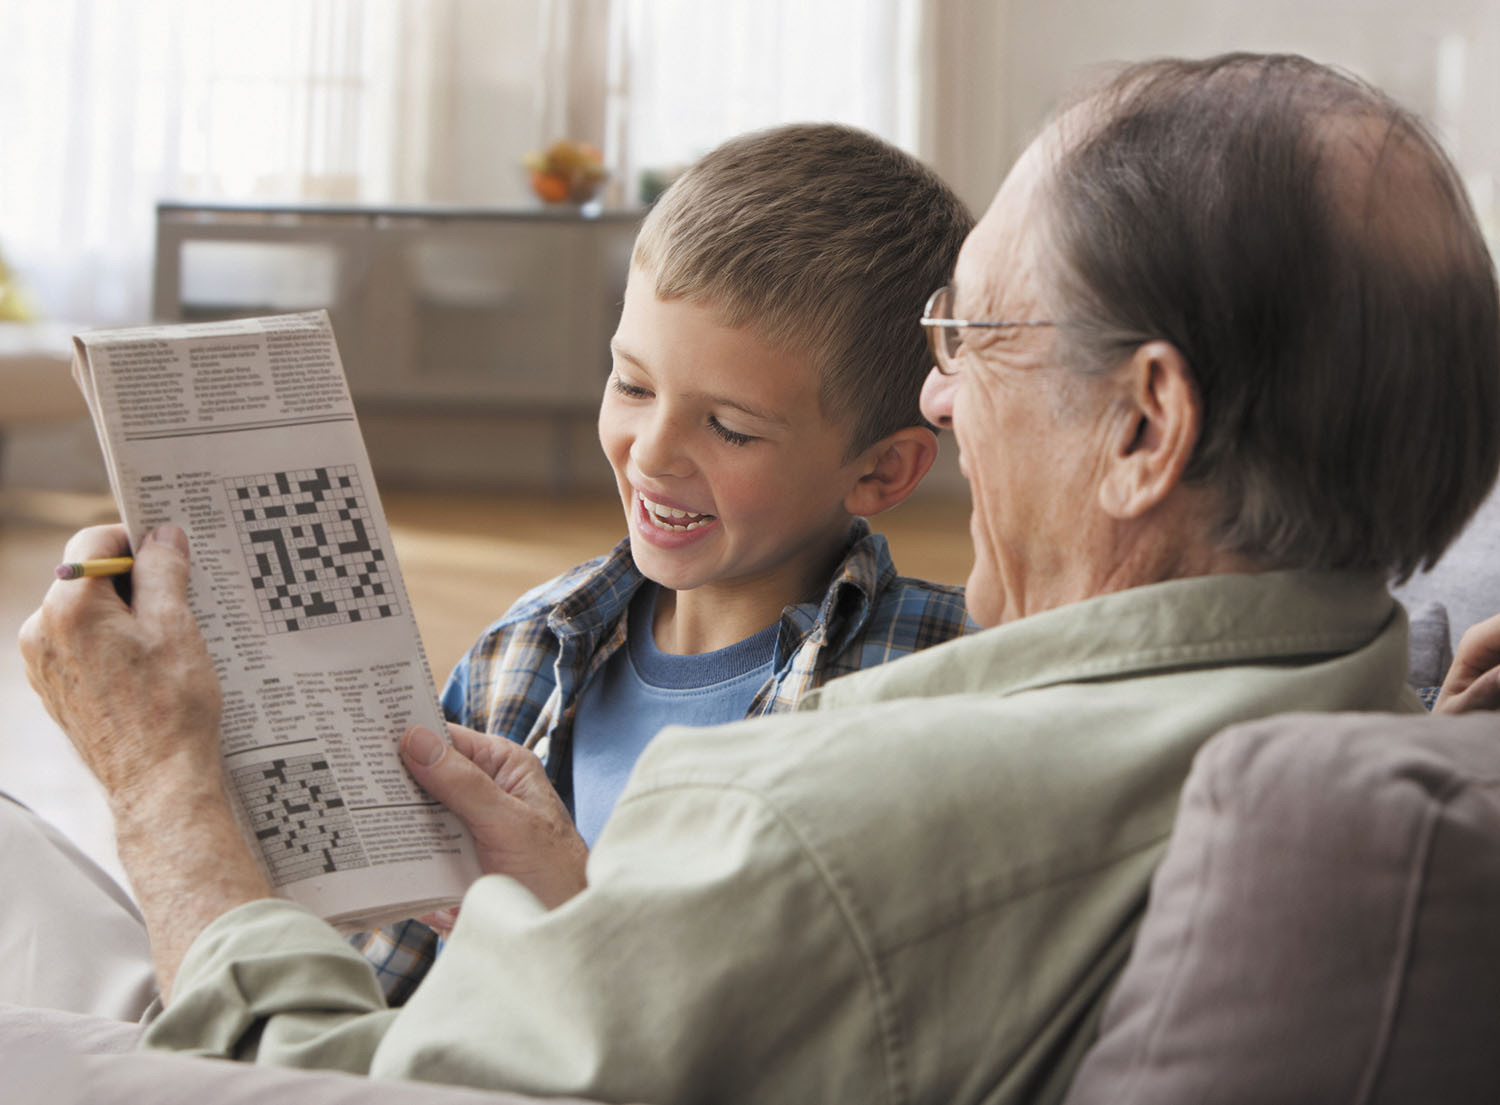 photo of a grandfather and grandson working on a newspaper crossword puzzle together